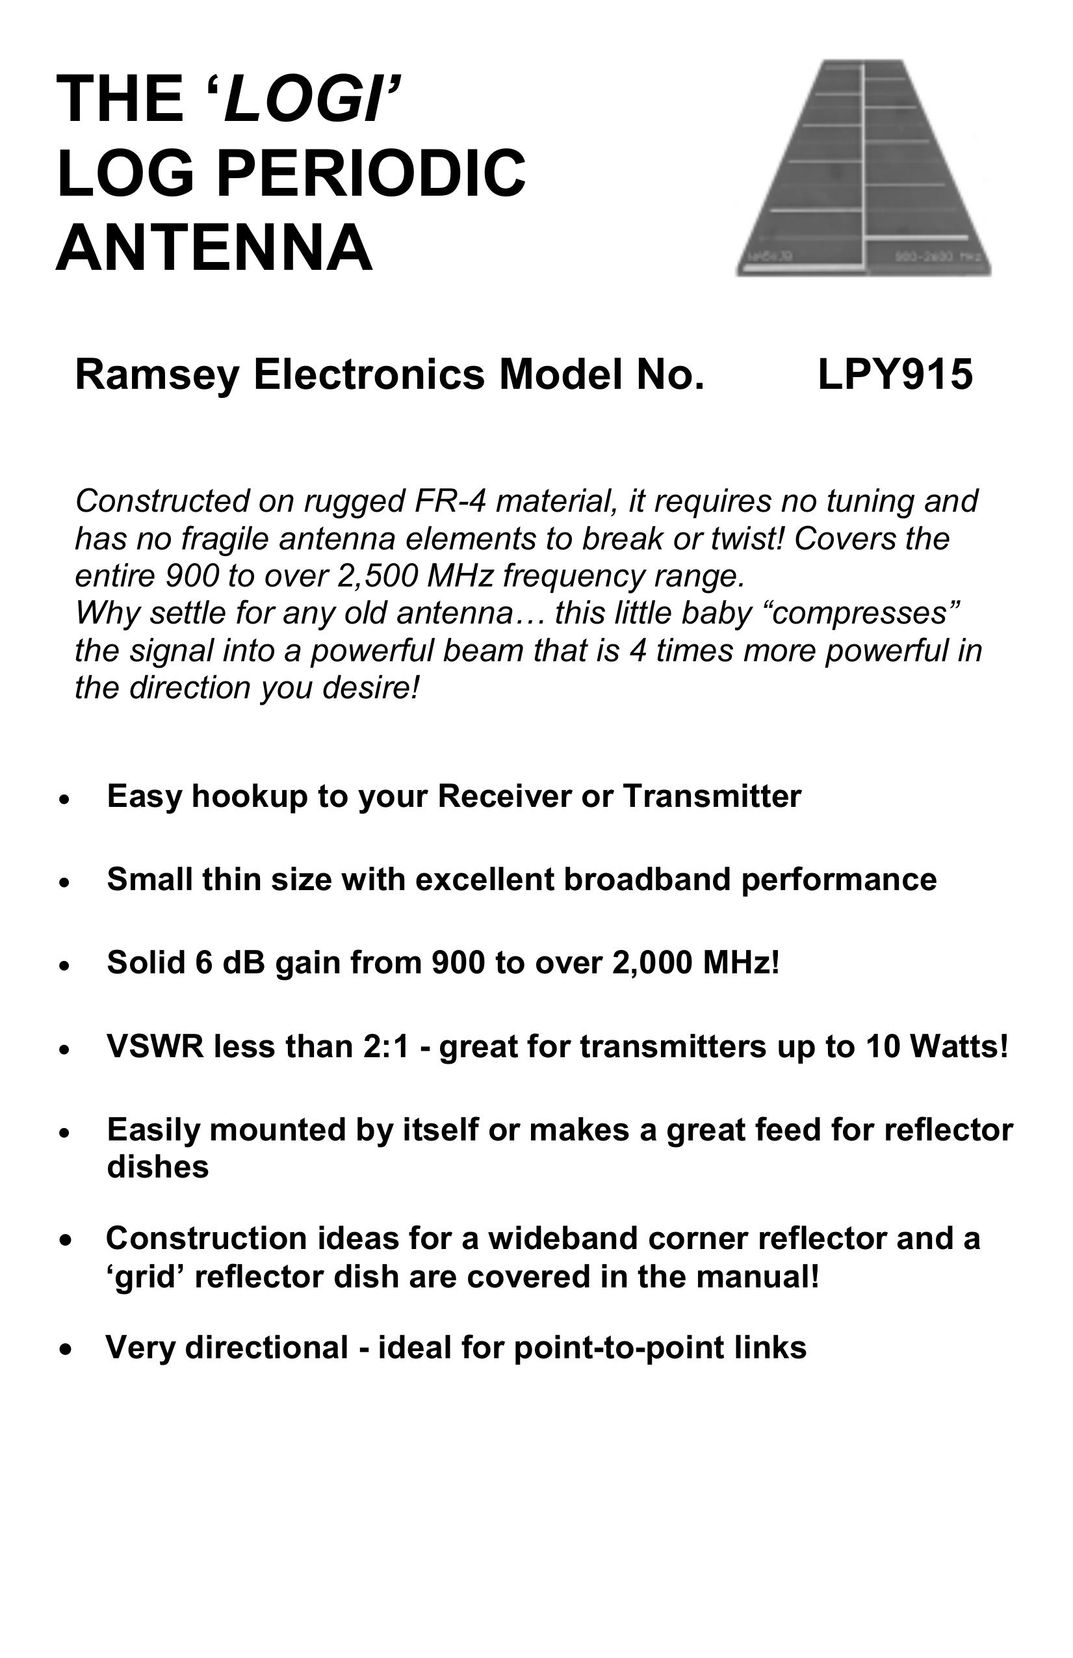 Ramsey Electronics LPY915 Stereo System User Manual